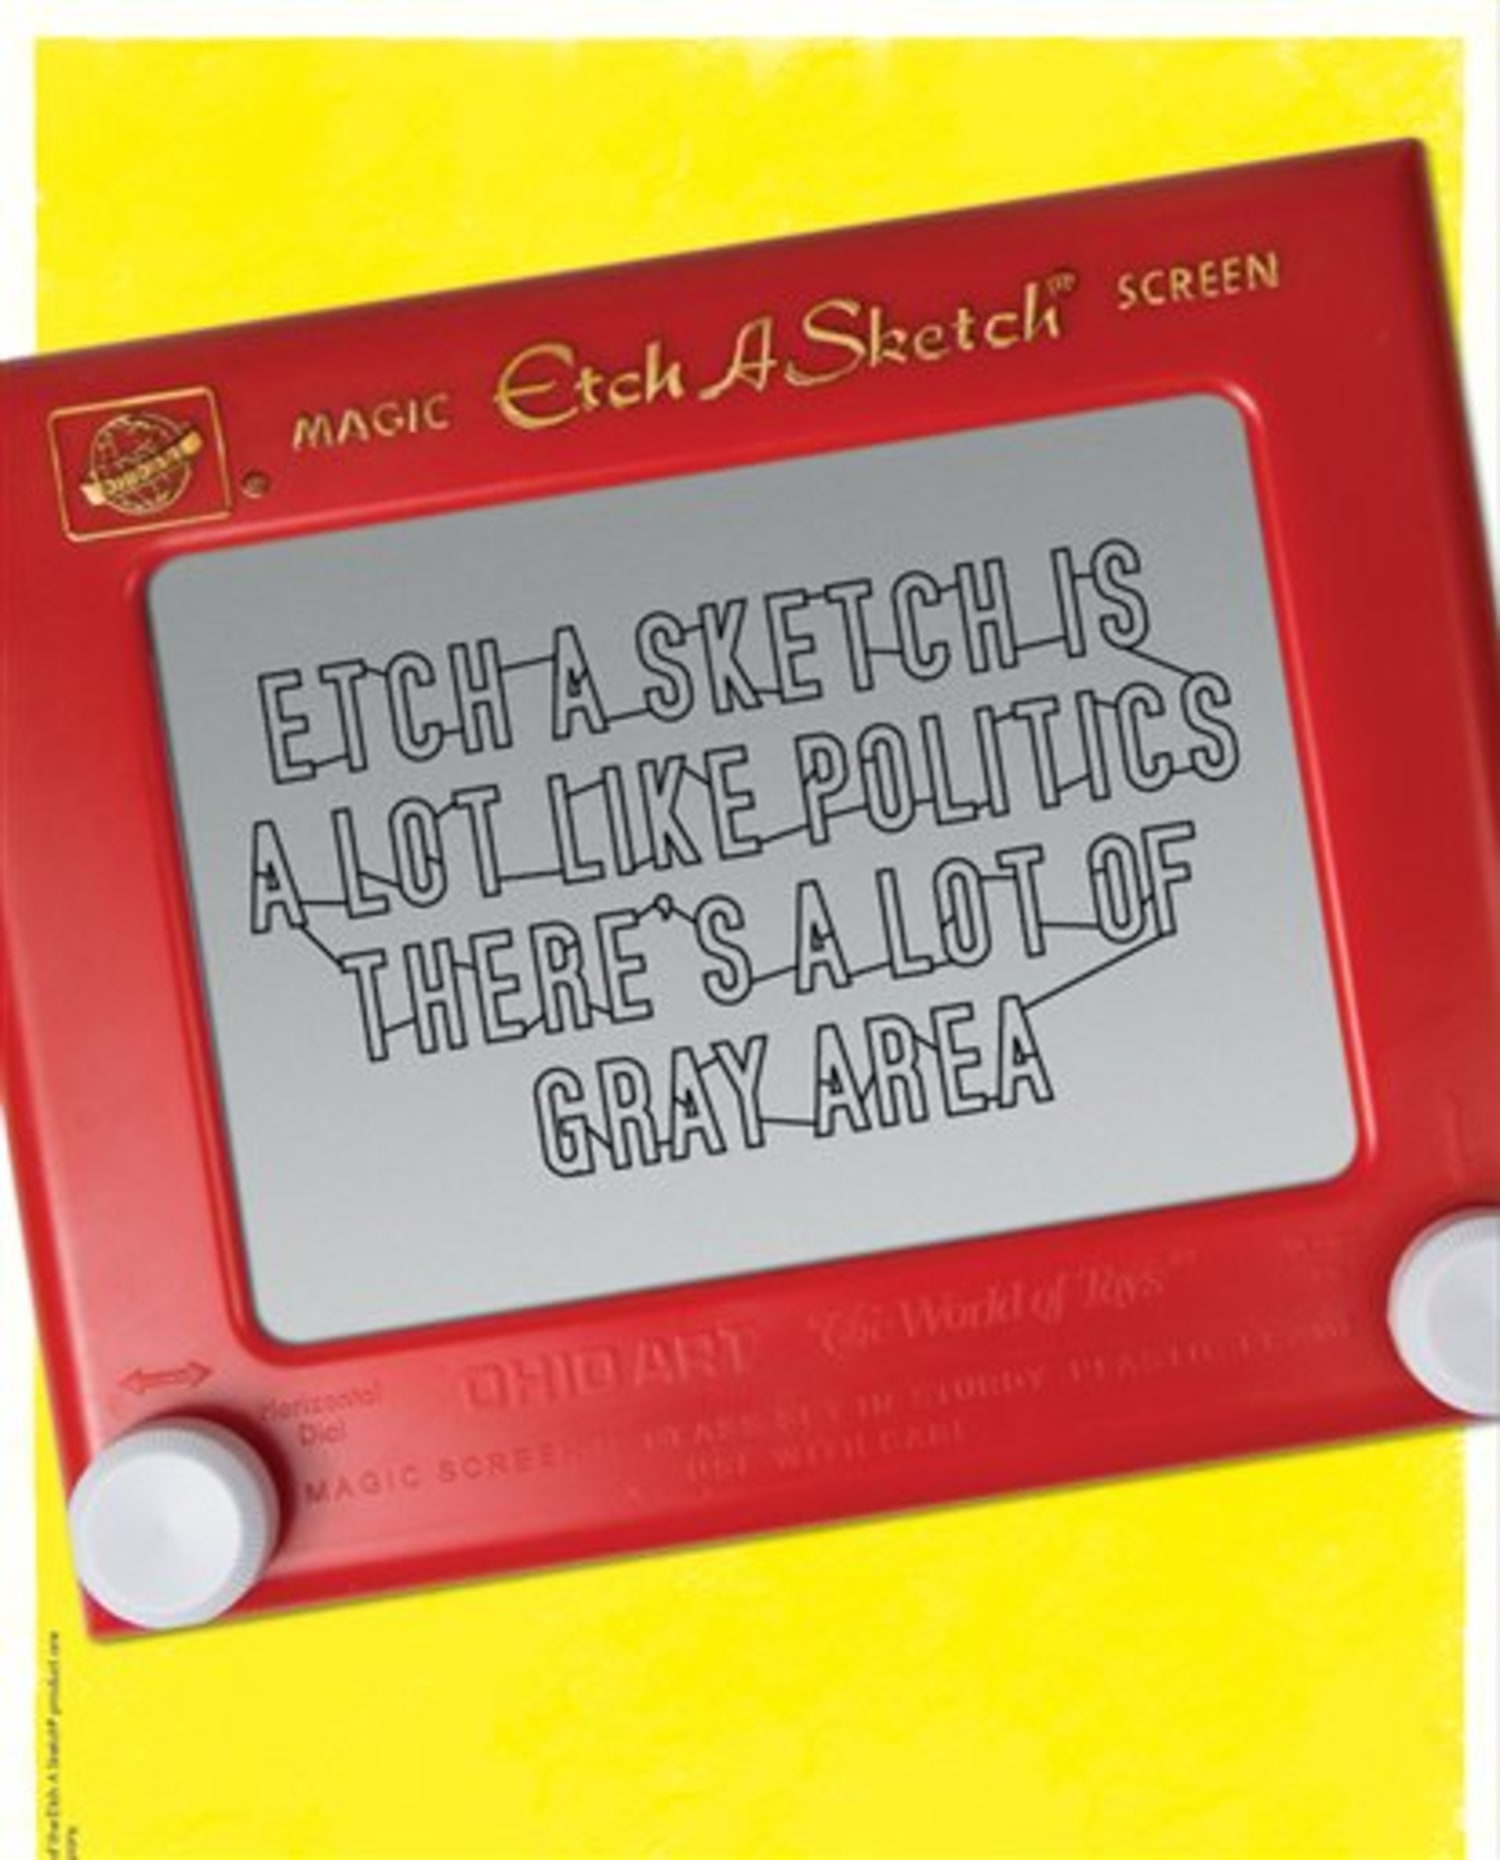 Etch a Sketch: Contest For All The Sketchers - Rajasthan Studio